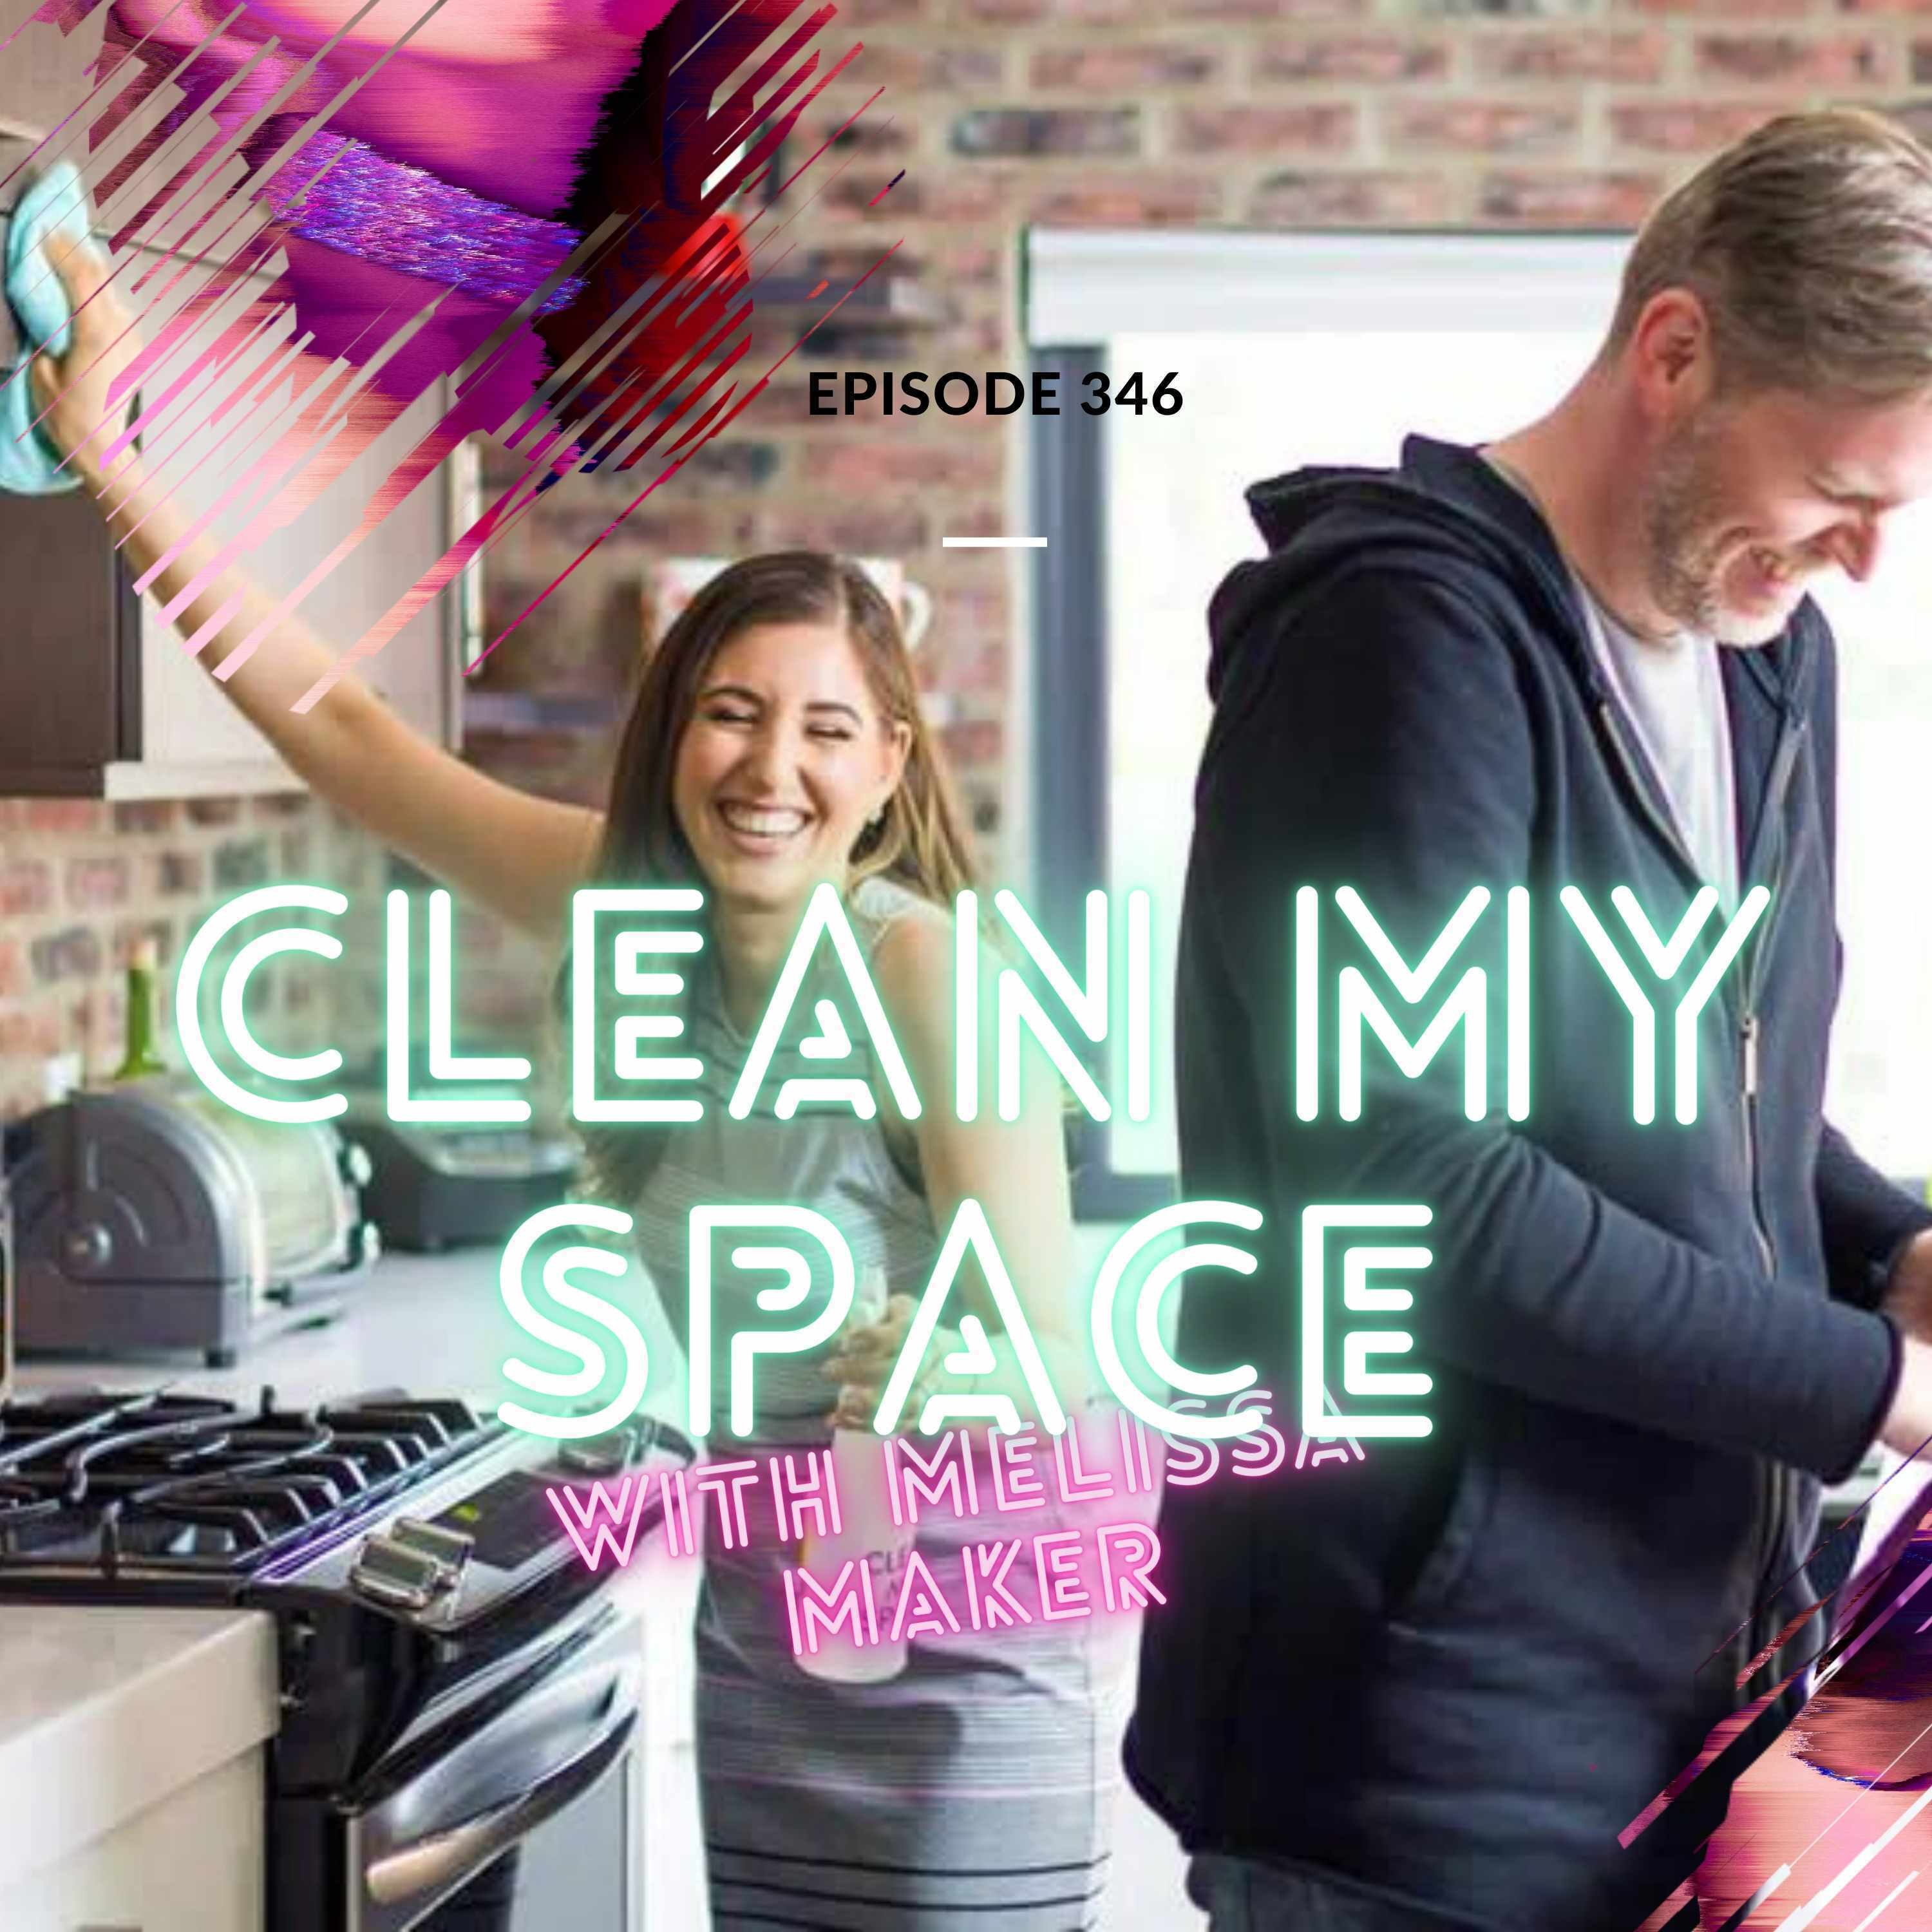 Clean My Space interview with Melissa Maker!